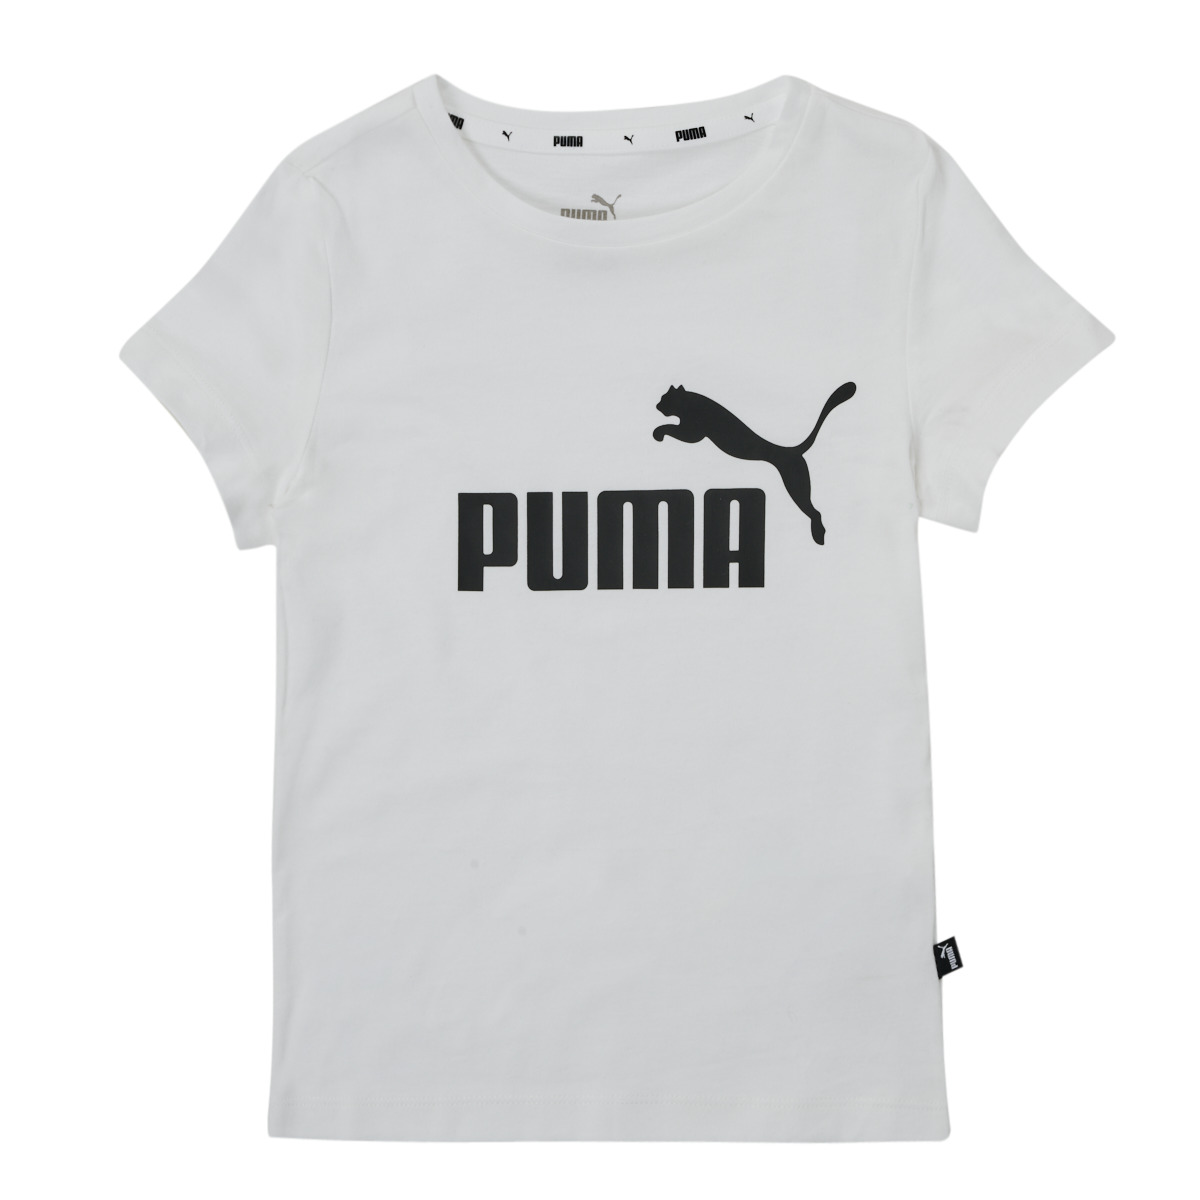 Textil Rapariga AMI and Active PUMA Drop a Multi-Part Sneaker and Apparel Collection ESS TEE Branco